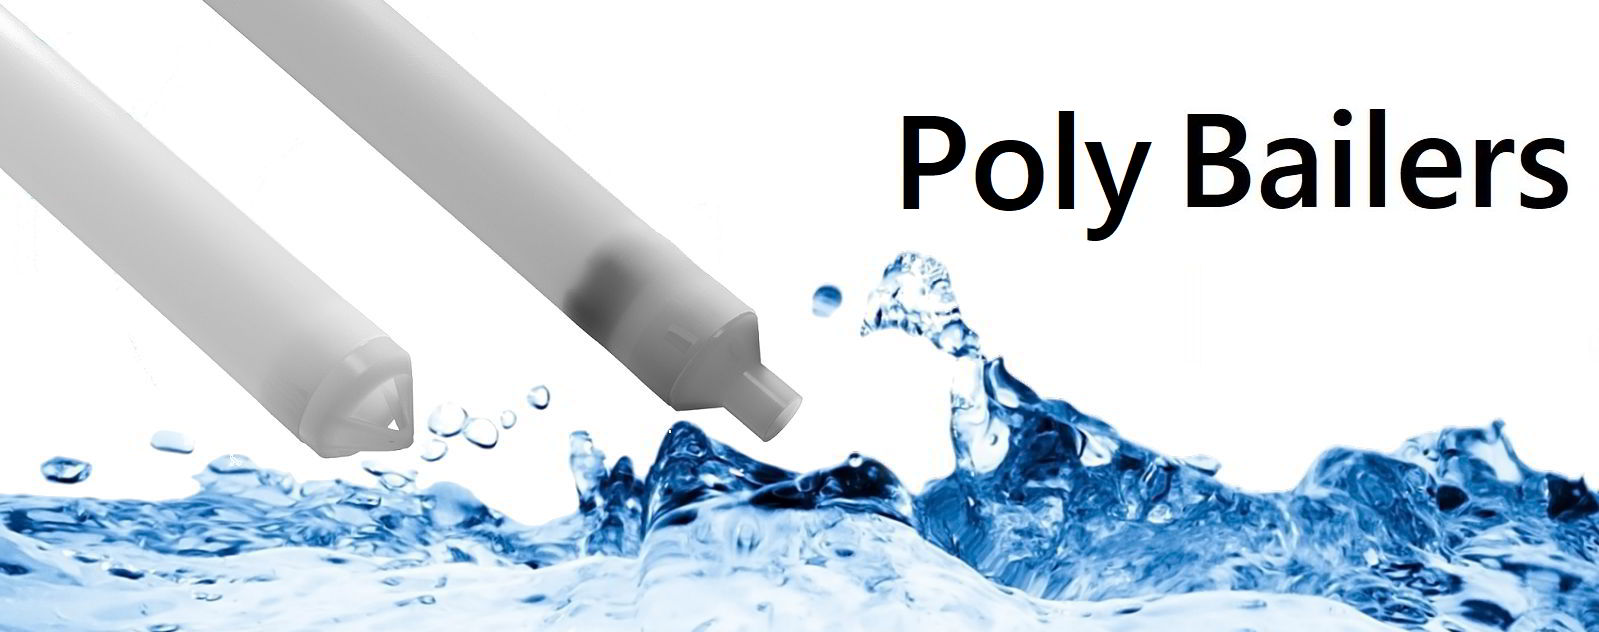 Poly Bailers